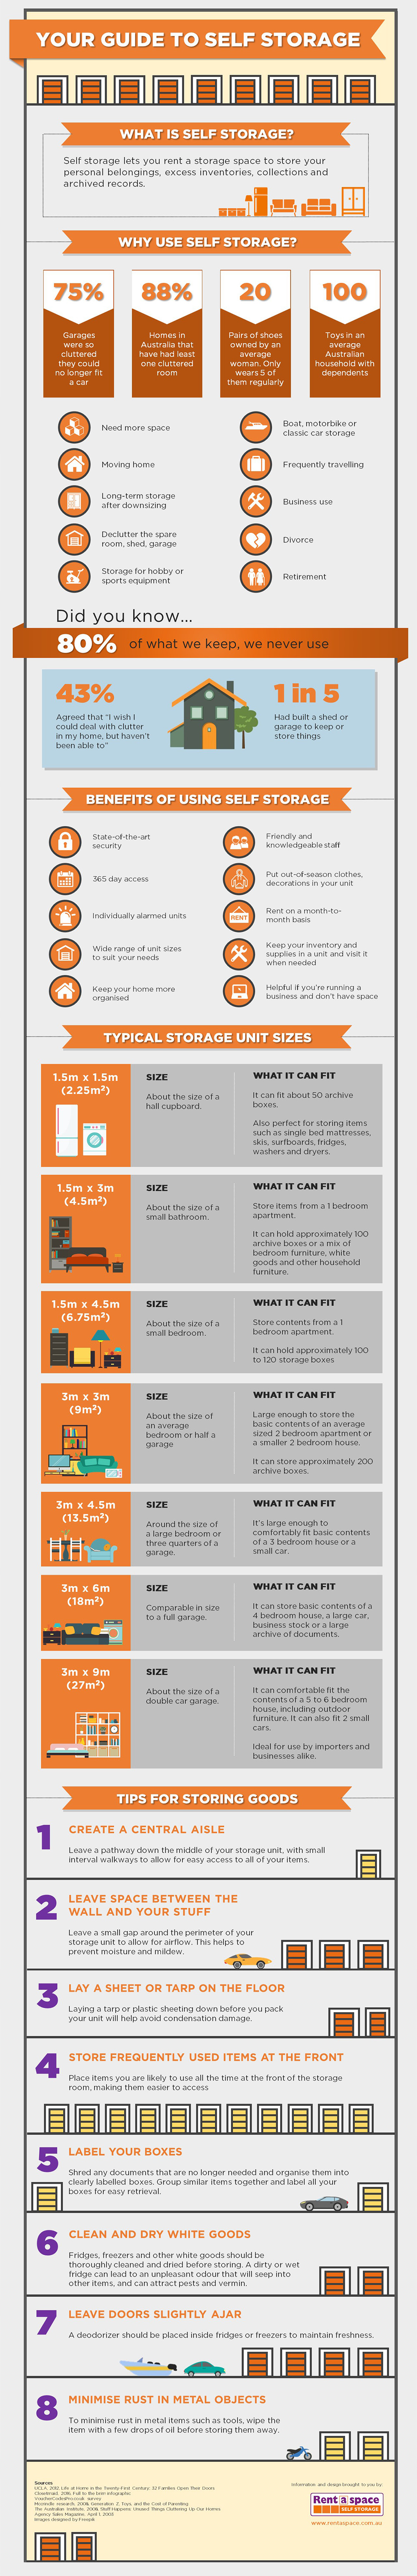 guide-to-self-storage-infograpic